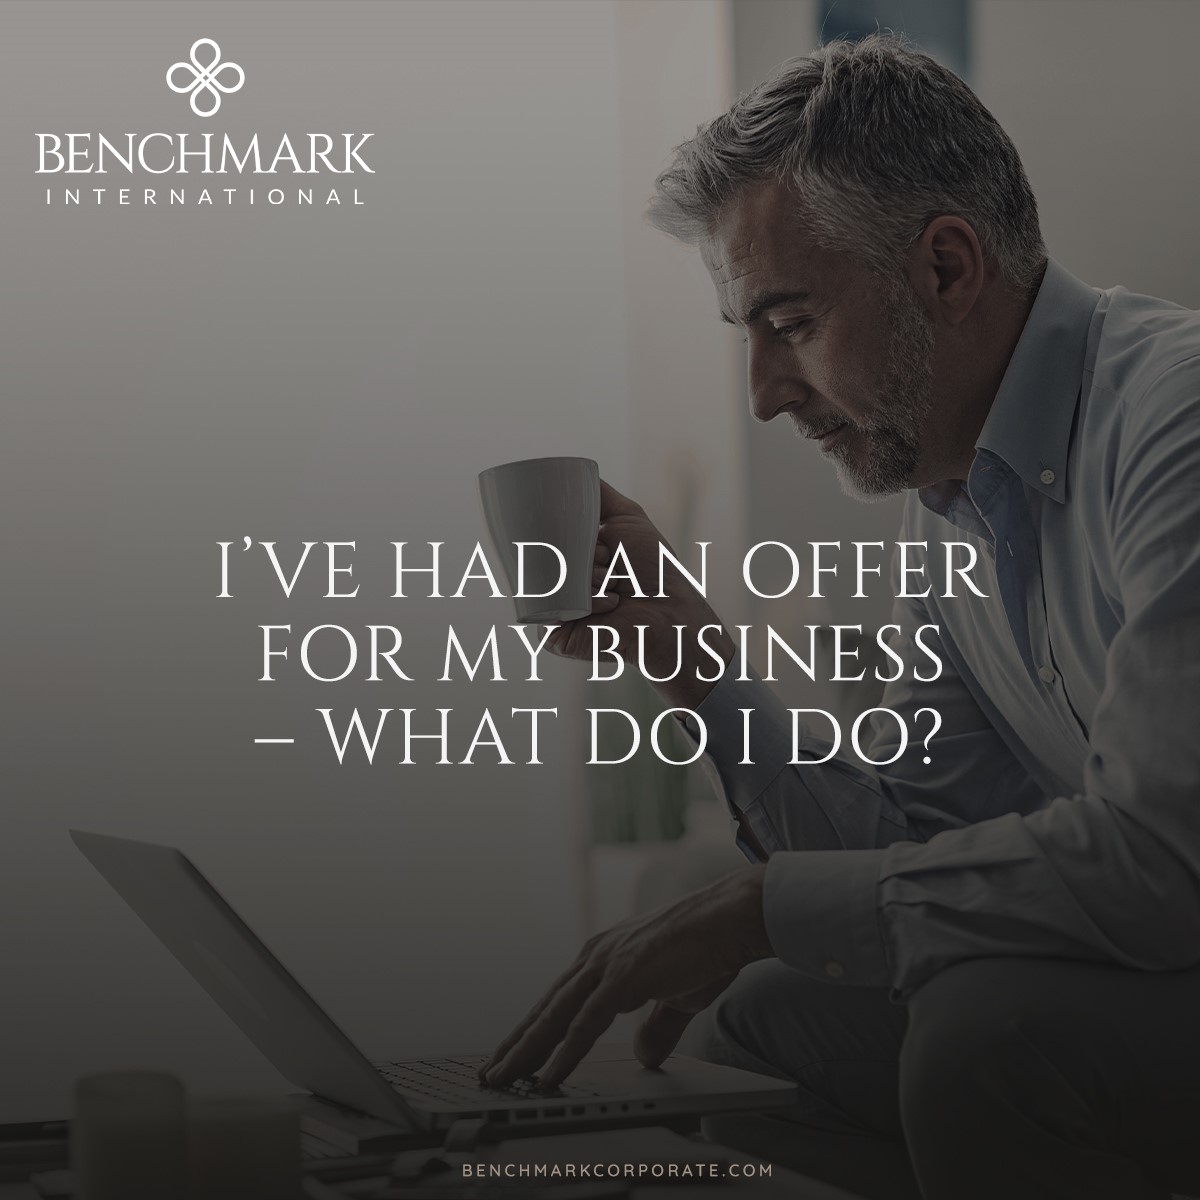 What do I do when I've had an offer for my business?